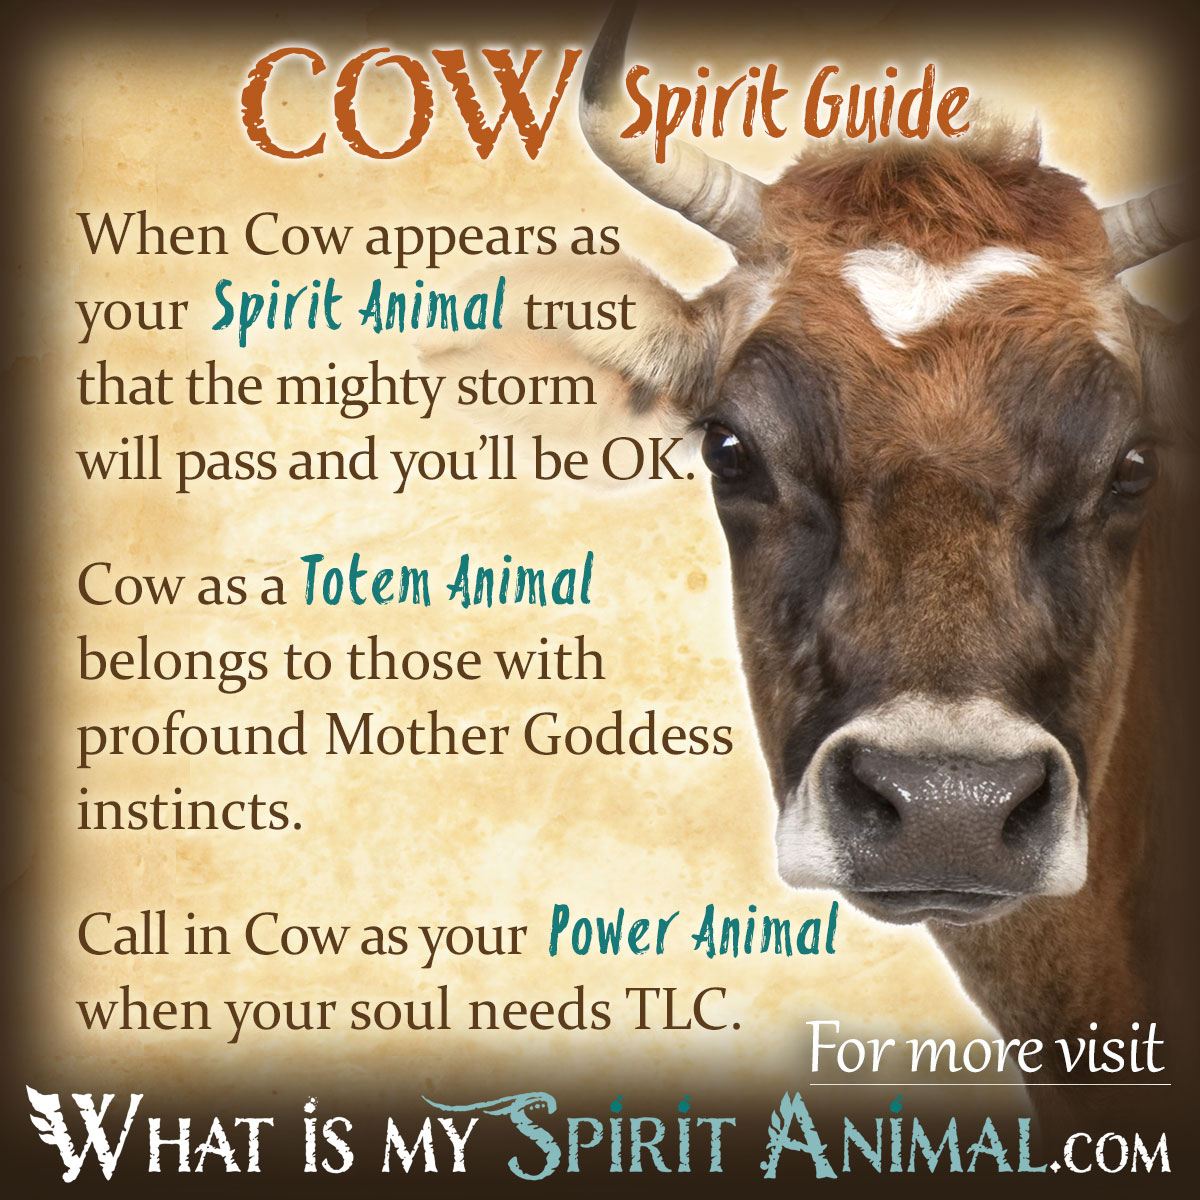 What Is The Prophetic Meaning Of Cows In Dreams?